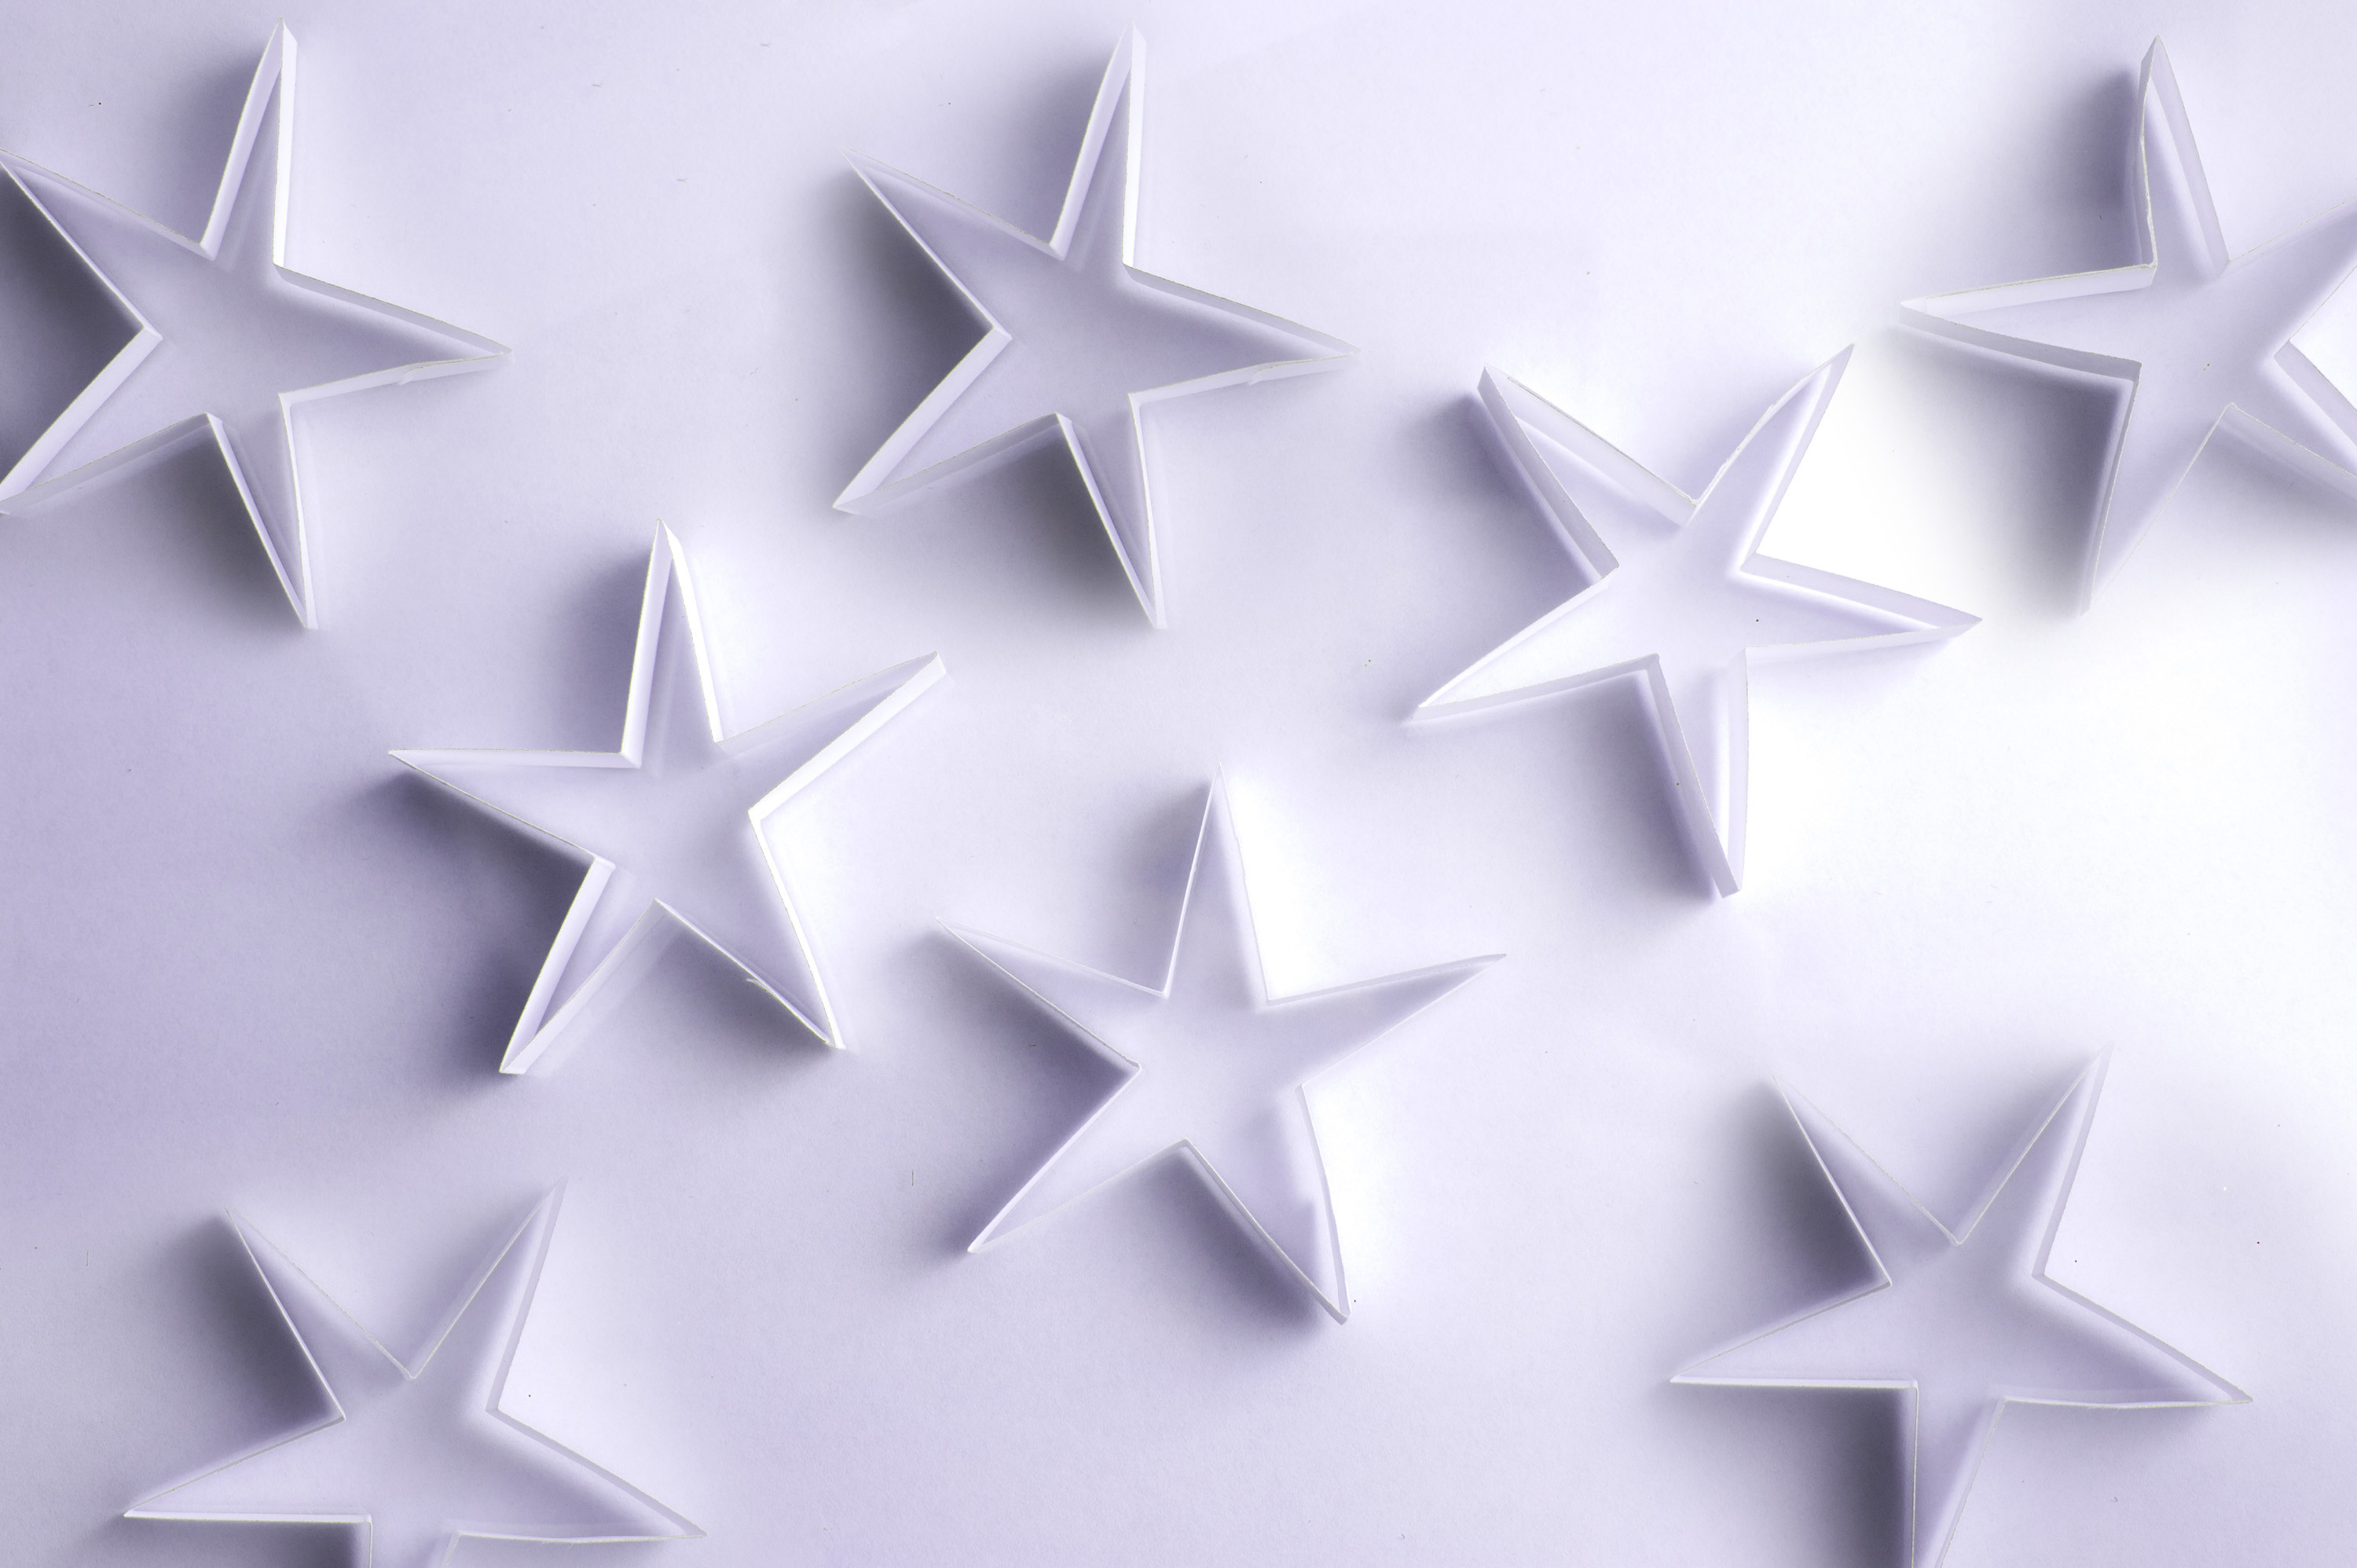 3000x1996 Scattered paper stars on a white background form a lovely delicate backdrop  for your Christmas message